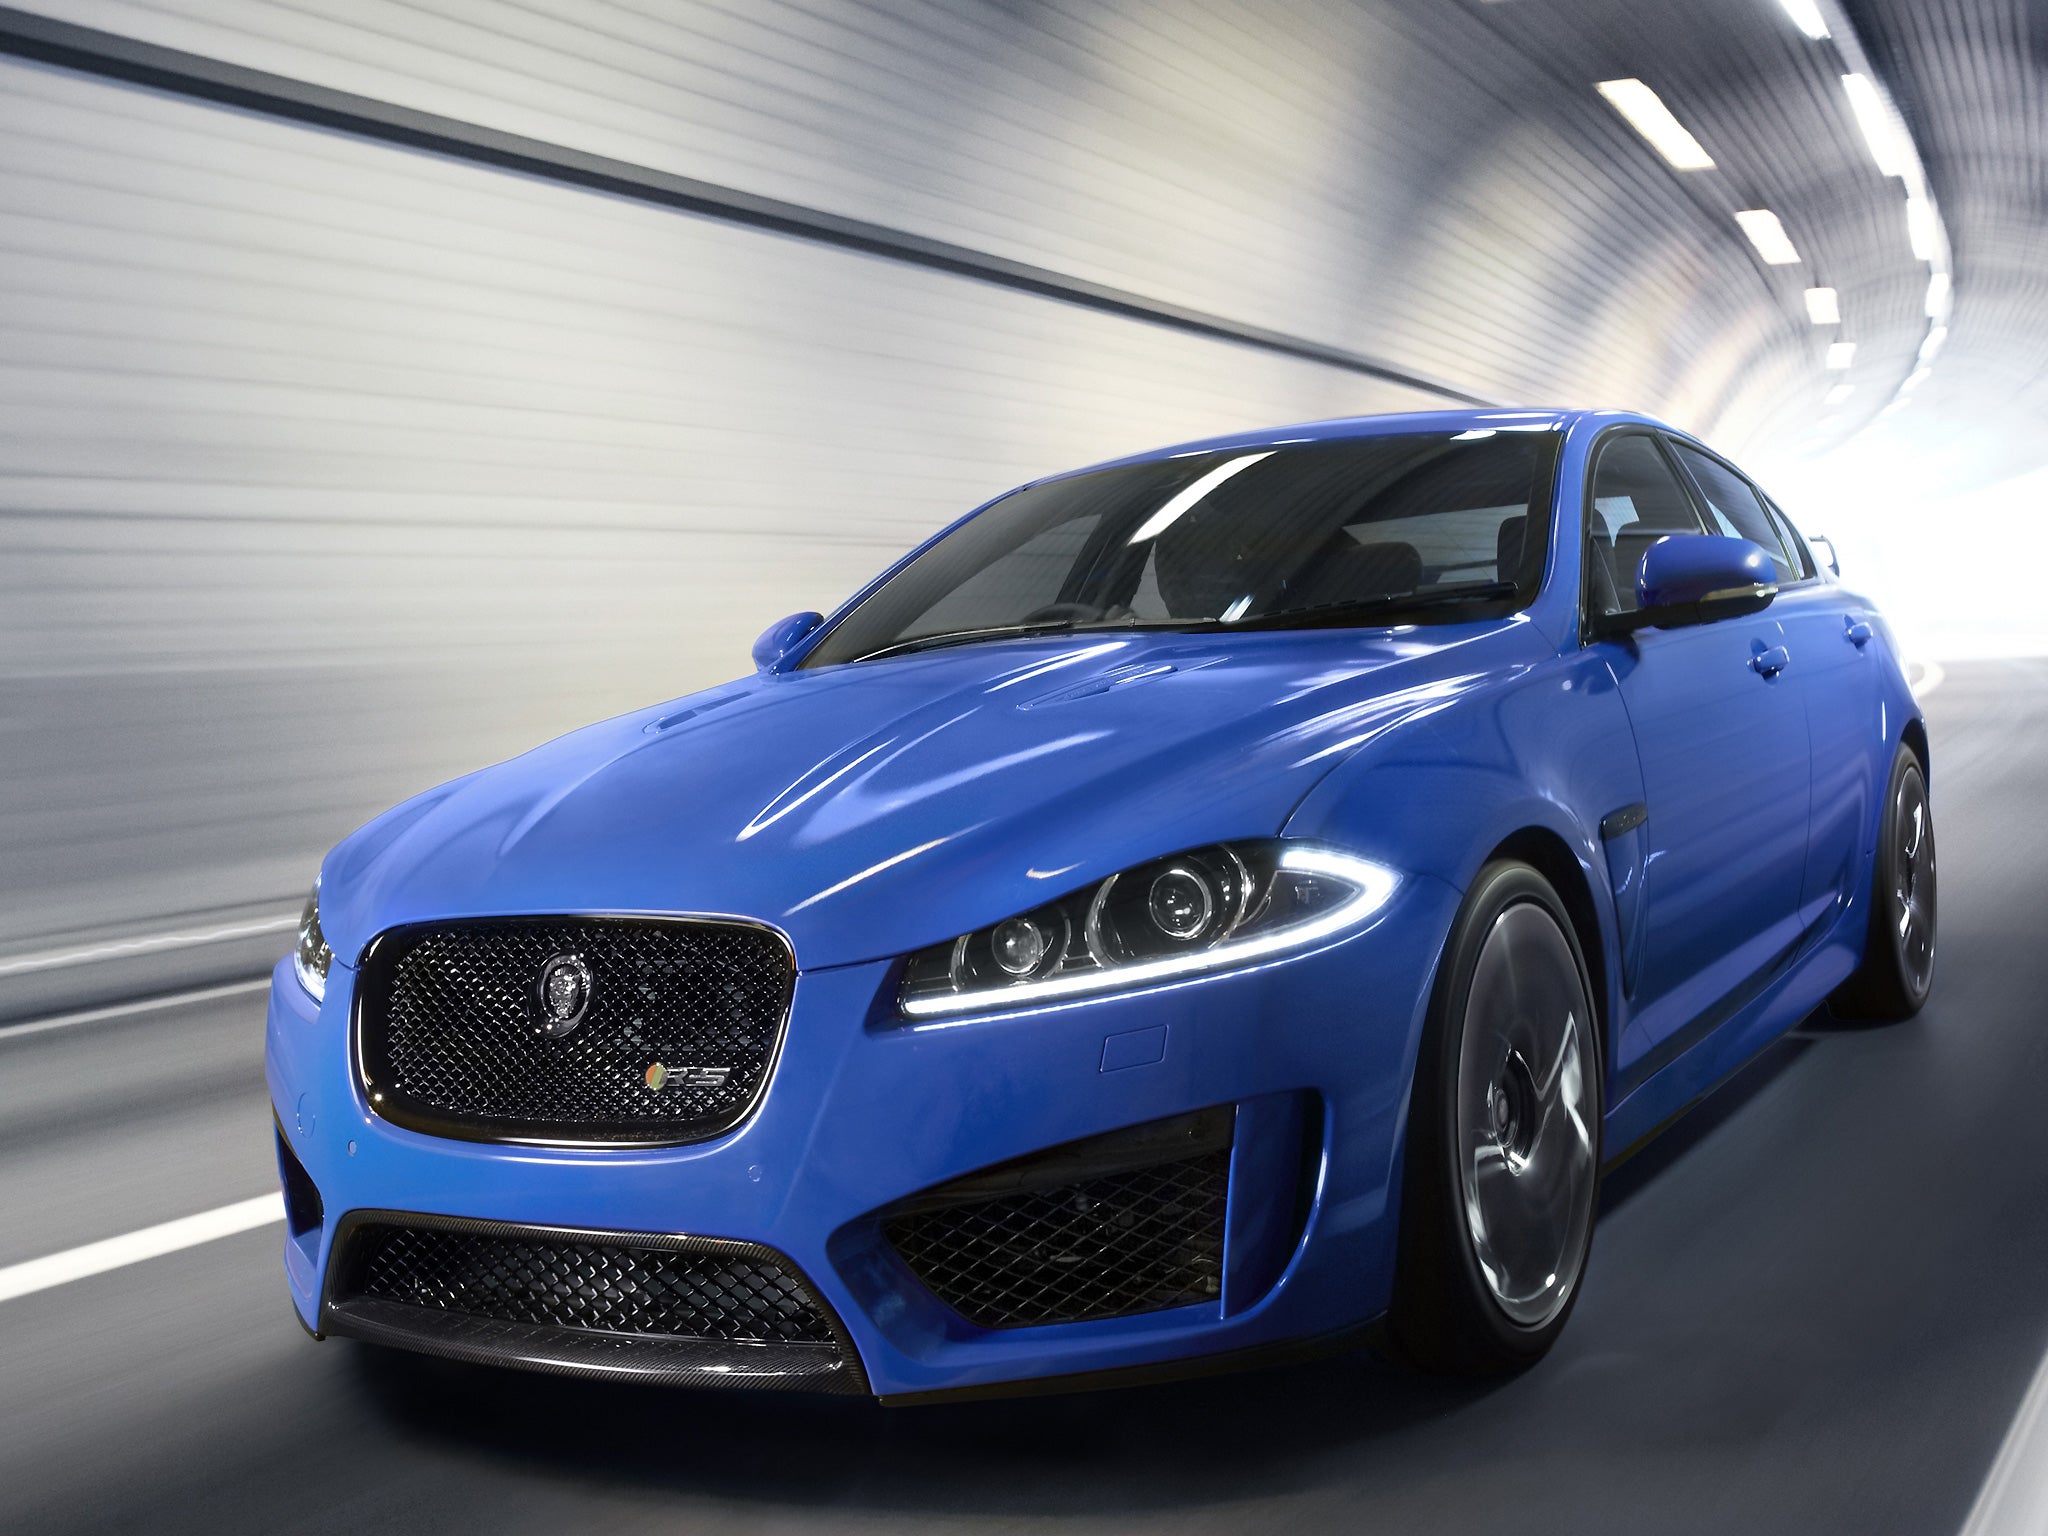 The all-new XFR-S performance saloon